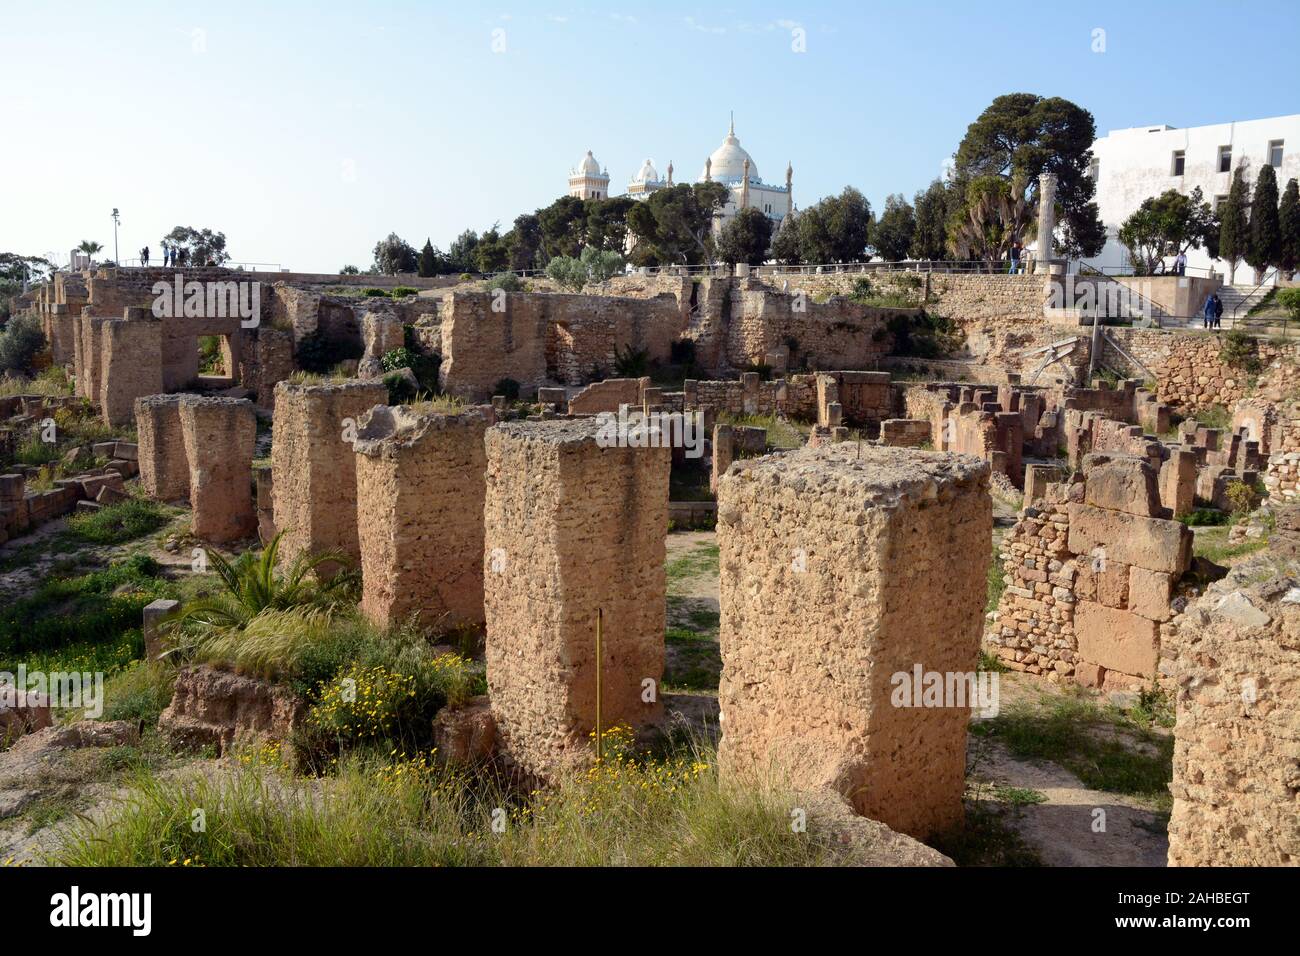 The old Punic (Carthaginian) archaeological ruins at Byrsa Hill in the posh Tunis suburb of Carthage, on the Mediterranean coast of Tunisia. Stock Photo